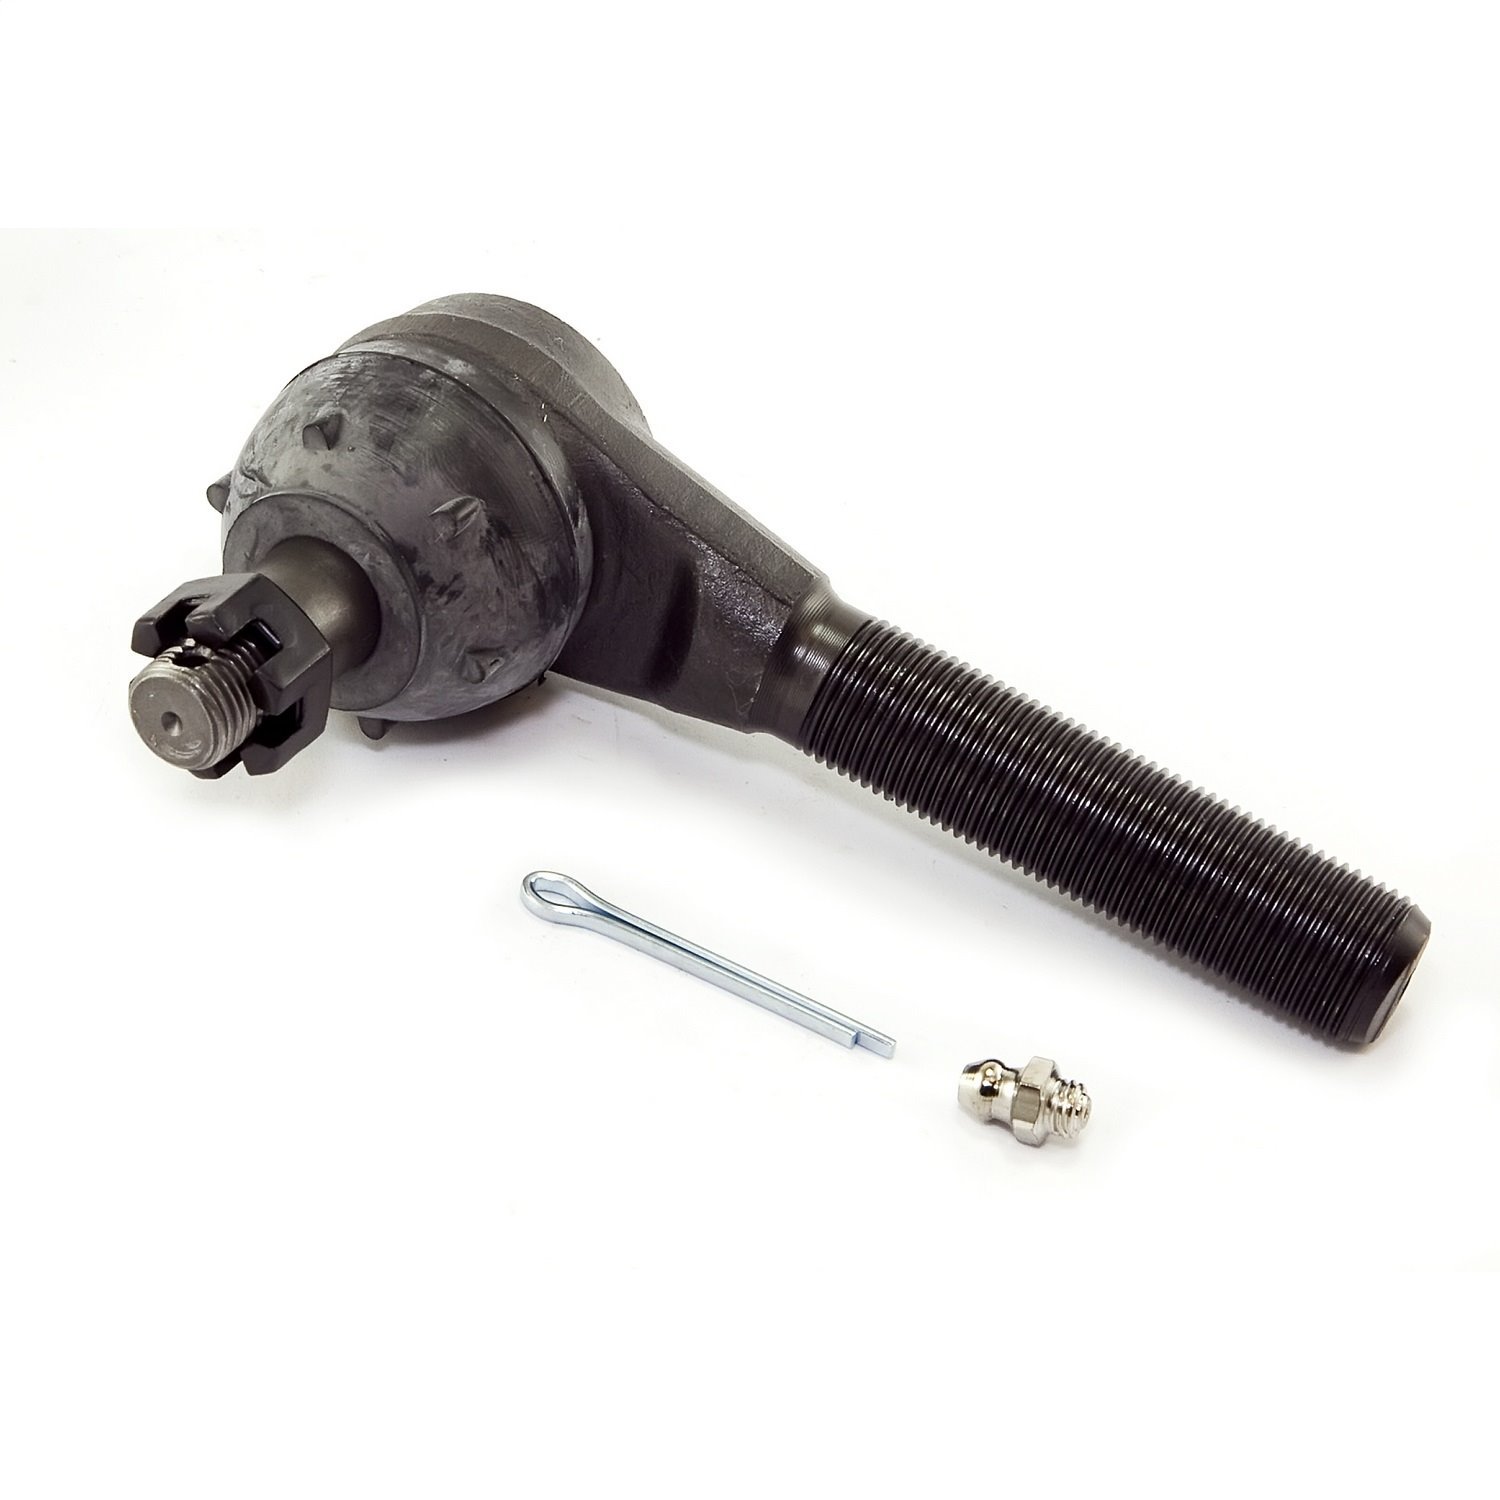 This tie rod end from Omix-ADA fits 84-90 Jeep Cherokees and 87-90 Wrangler. Left hand thread.